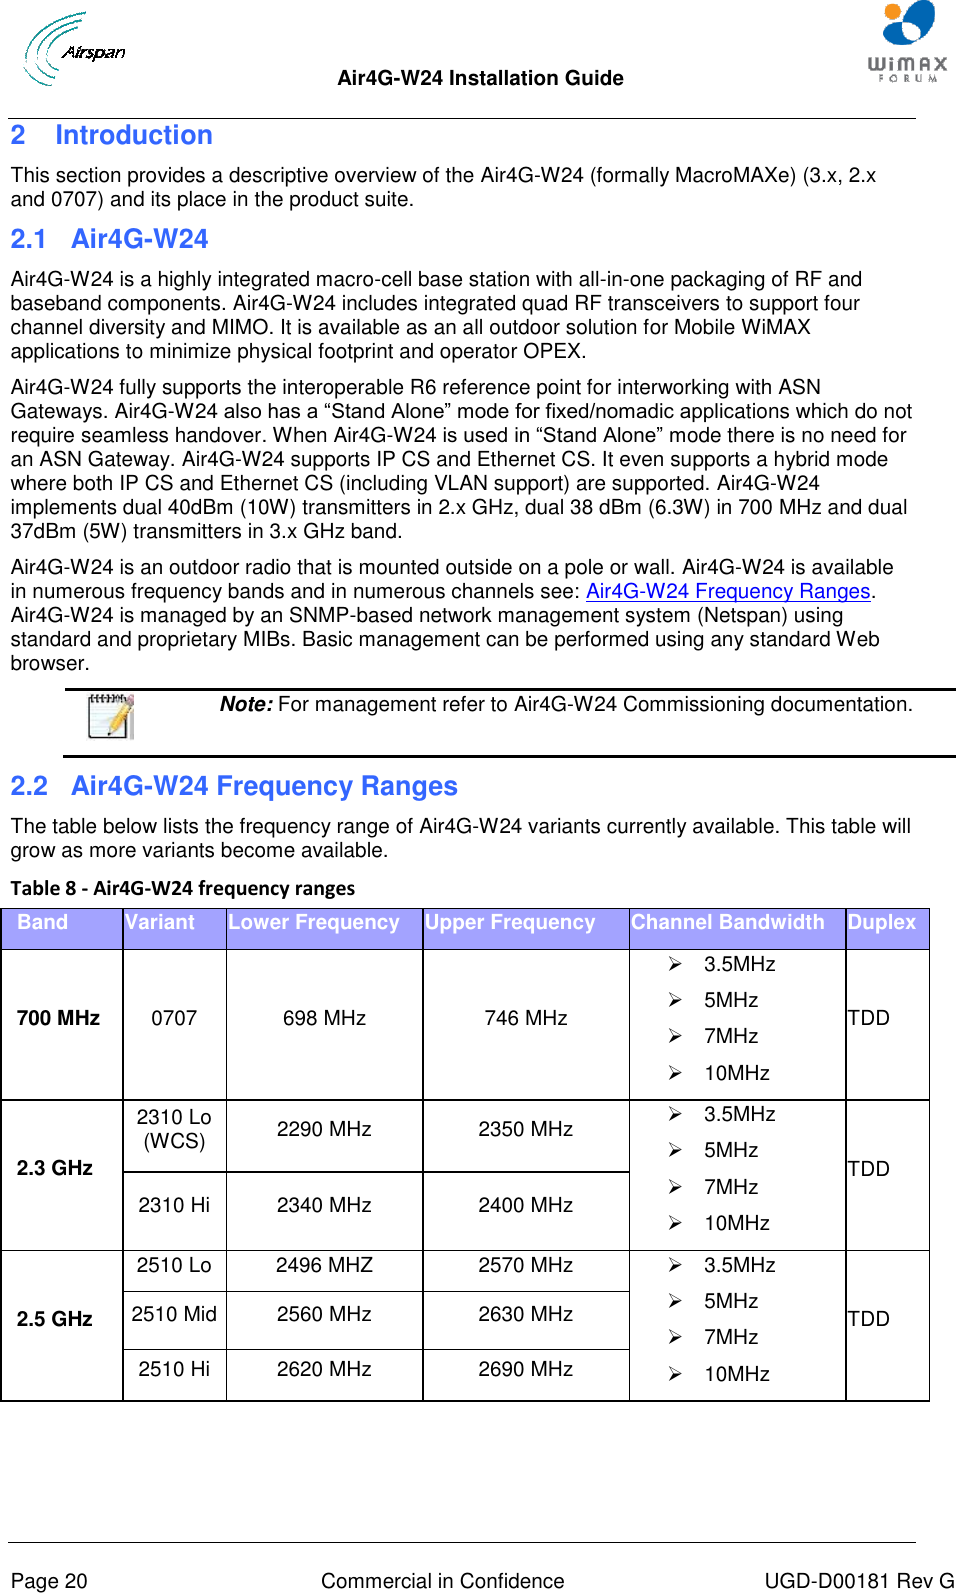  Air4G-W24 Installation Guide     Page 20  Commercial in Confidence  UGD-D00181 Rev G 2  Introduction This section provides a descriptive overview of the Air4G-W24 (formally MacroMAXe) (3.x, 2.x and 0707) and its place in the product suite. 2.1  Air4G-W24 Air4G-W24 is a highly integrated macro-cell base station with all-in-one packaging of RF and baseband components. Air4G-W24 includes integrated quad RF transceivers to support four channel diversity and MIMO. It is available as an all outdoor solution for Mobile WiMAX applications to minimize physical footprint and operator OPEX. Air4G-W24 fully supports the interoperable R6 reference point for interworking with ASN Gateways. Air4G-W24 also has a “Stand Alone” mode for fixed/nomadic applications which do not require seamless handover. When Air4G-W24 is used in “Stand Alone” mode there is no need for an ASN Gateway. Air4G-W24 supports IP CS and Ethernet CS. It even supports a hybrid mode where both IP CS and Ethernet CS (including VLAN support) are supported. Air4G-W24 implements dual 40dBm (10W) transmitters in 2.x GHz, dual 38 dBm (6.3W) in 700 MHz and dual 37dBm (5W) transmitters in 3.x GHz band. Air4G-W24 is an outdoor radio that is mounted outside on a pole or wall. Air4G-W24 is available in numerous frequency bands and in numerous channels see: Air4G-W24 Frequency Ranges.Air4G-W24 is managed by an SNMP-based network management system (Netspan) using standard and proprietary MIBs. Basic management can be performed using any standard Web browser.  Note: For management refer to Air4G-W24 Commissioning documentation. 2.2  Air4G-W24 Frequency Ranges The table below lists the frequency range of Air4G-W24 variants currently available. This table will grow as more variants become available. Table 8 - Air4G-W24 frequency ranges Band Variant Lower Frequency Upper Frequency Channel Bandwidth Duplex 700 MHz 0707 698 MHz 746 MHz   3.5MHz   5MHz   7MHz   10MHz TDD 2.3 GHz 2310 Lo (WCS) 2290 MHz 2350 MHz   3.5MHz   5MHz   7MHz   10MHz TDD 2310 Hi 2340 MHz 2400 MHz 2.5 GHz 2510 Lo 2496 MHZ 2570 MHz   3.5MHz   5MHz   7MHz   10MHz TDD 2510 Mid 2560 MHz 2630 MHz 2510 Hi 2620 MHz 2690 MHz 